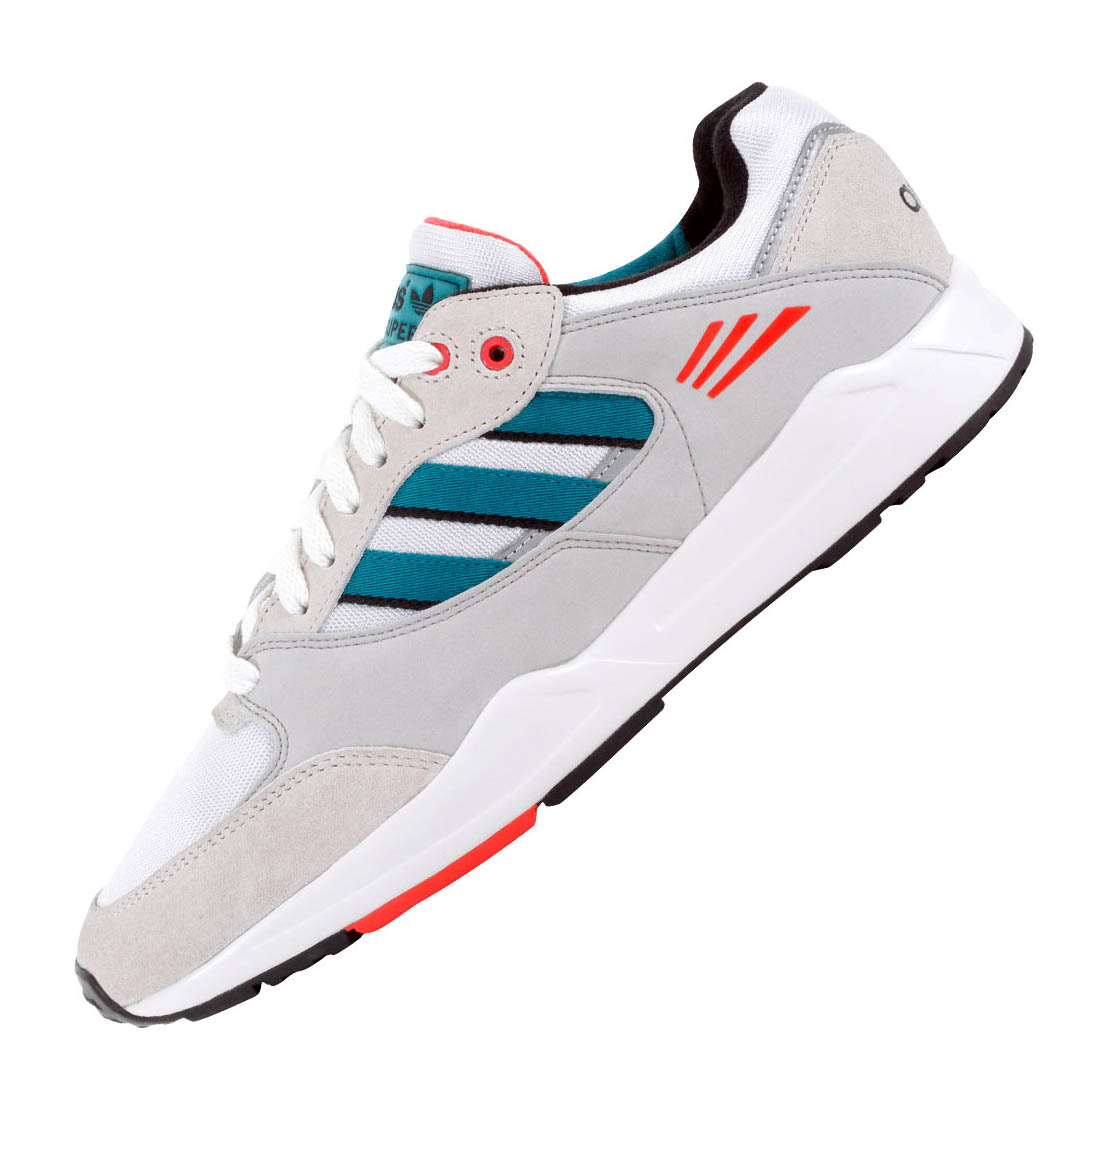 adidas-tech-super-running-white-teal-red-1